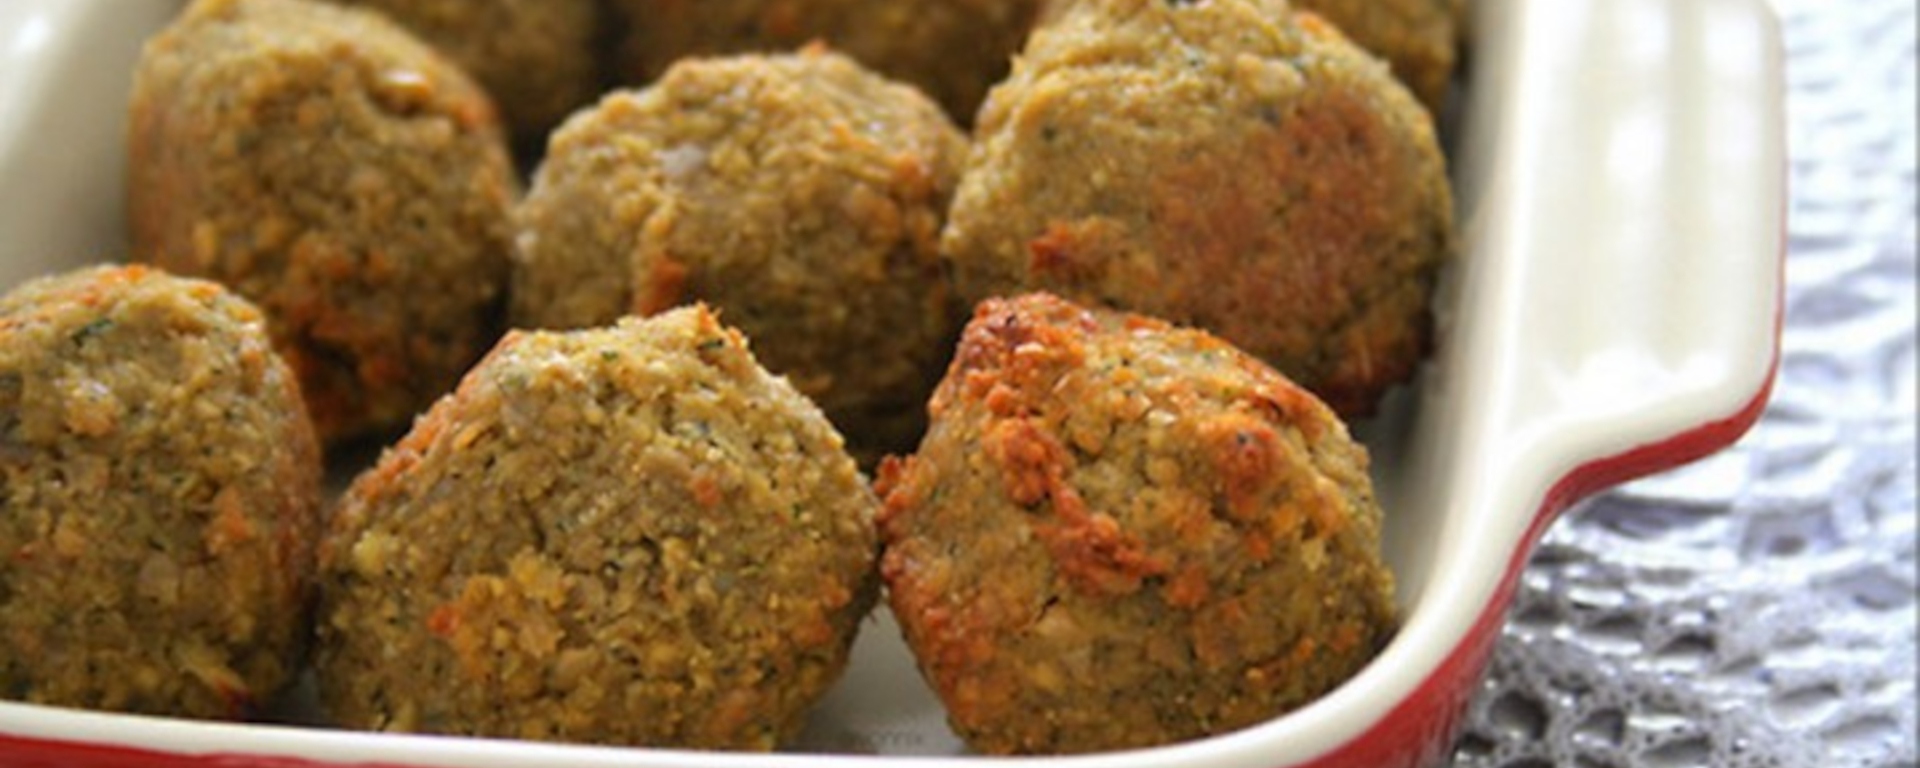 LuvMyRecipe.com - Baked Curry & Mint Falafels Featured